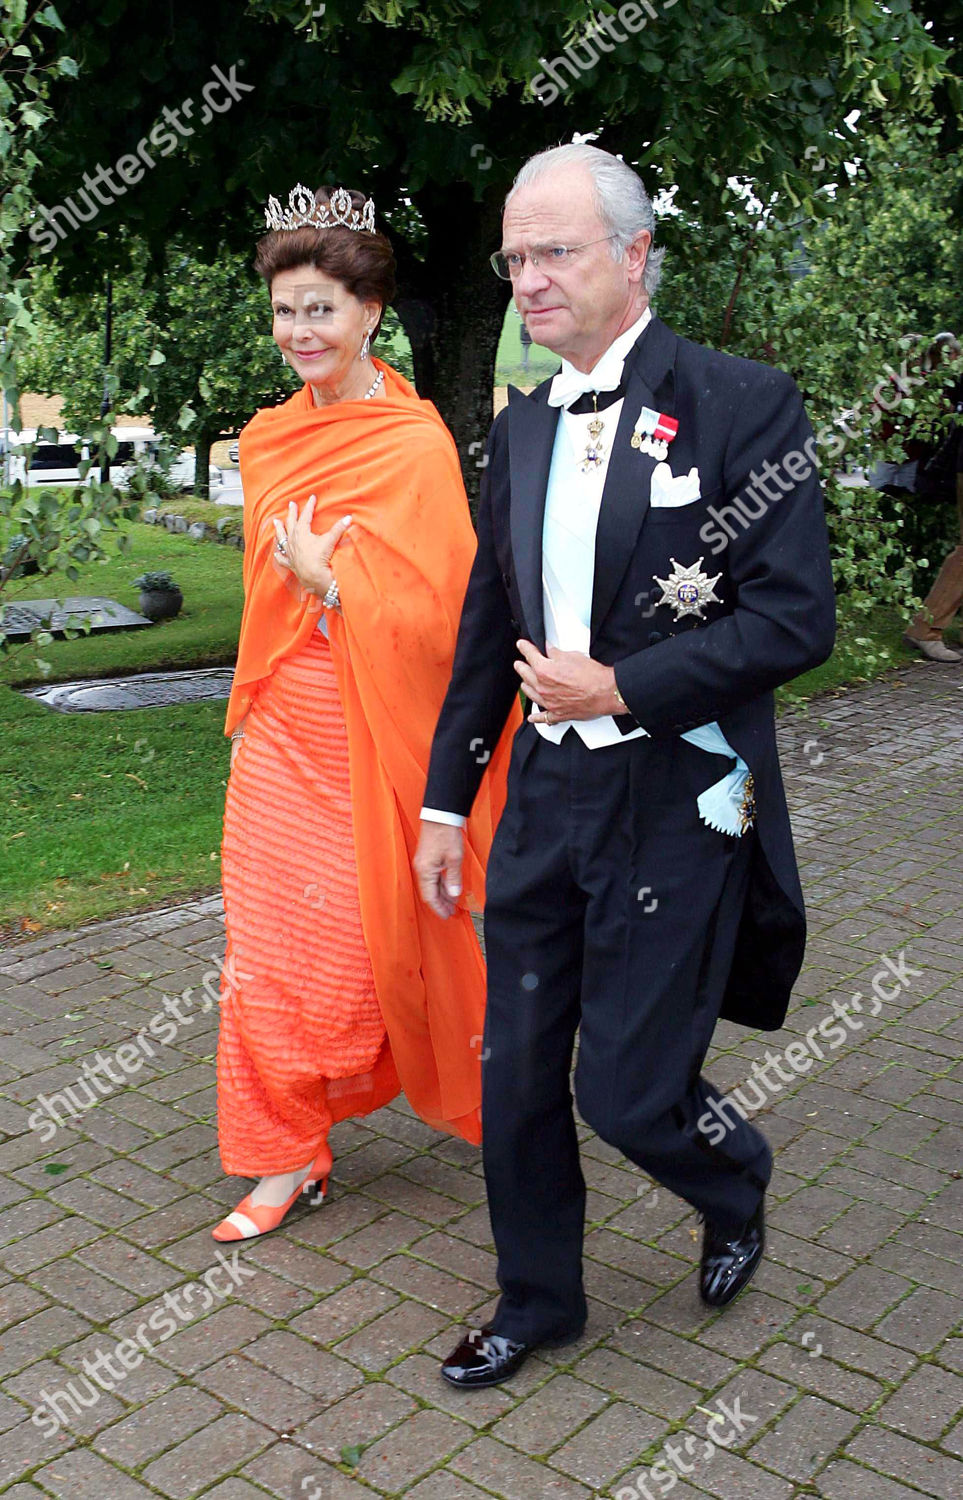 https://editorial01.shutterstock.com/wm-preview-1500/538876l/c3c3cb73/the-wedding-of-princess-anna-of-sayn-wittgenstein-berleburg-and-prince-manuel-of-bavaria-in-stigtoma-near-nykoeping-sweden-shutterstock-editorial-538876l.jpg